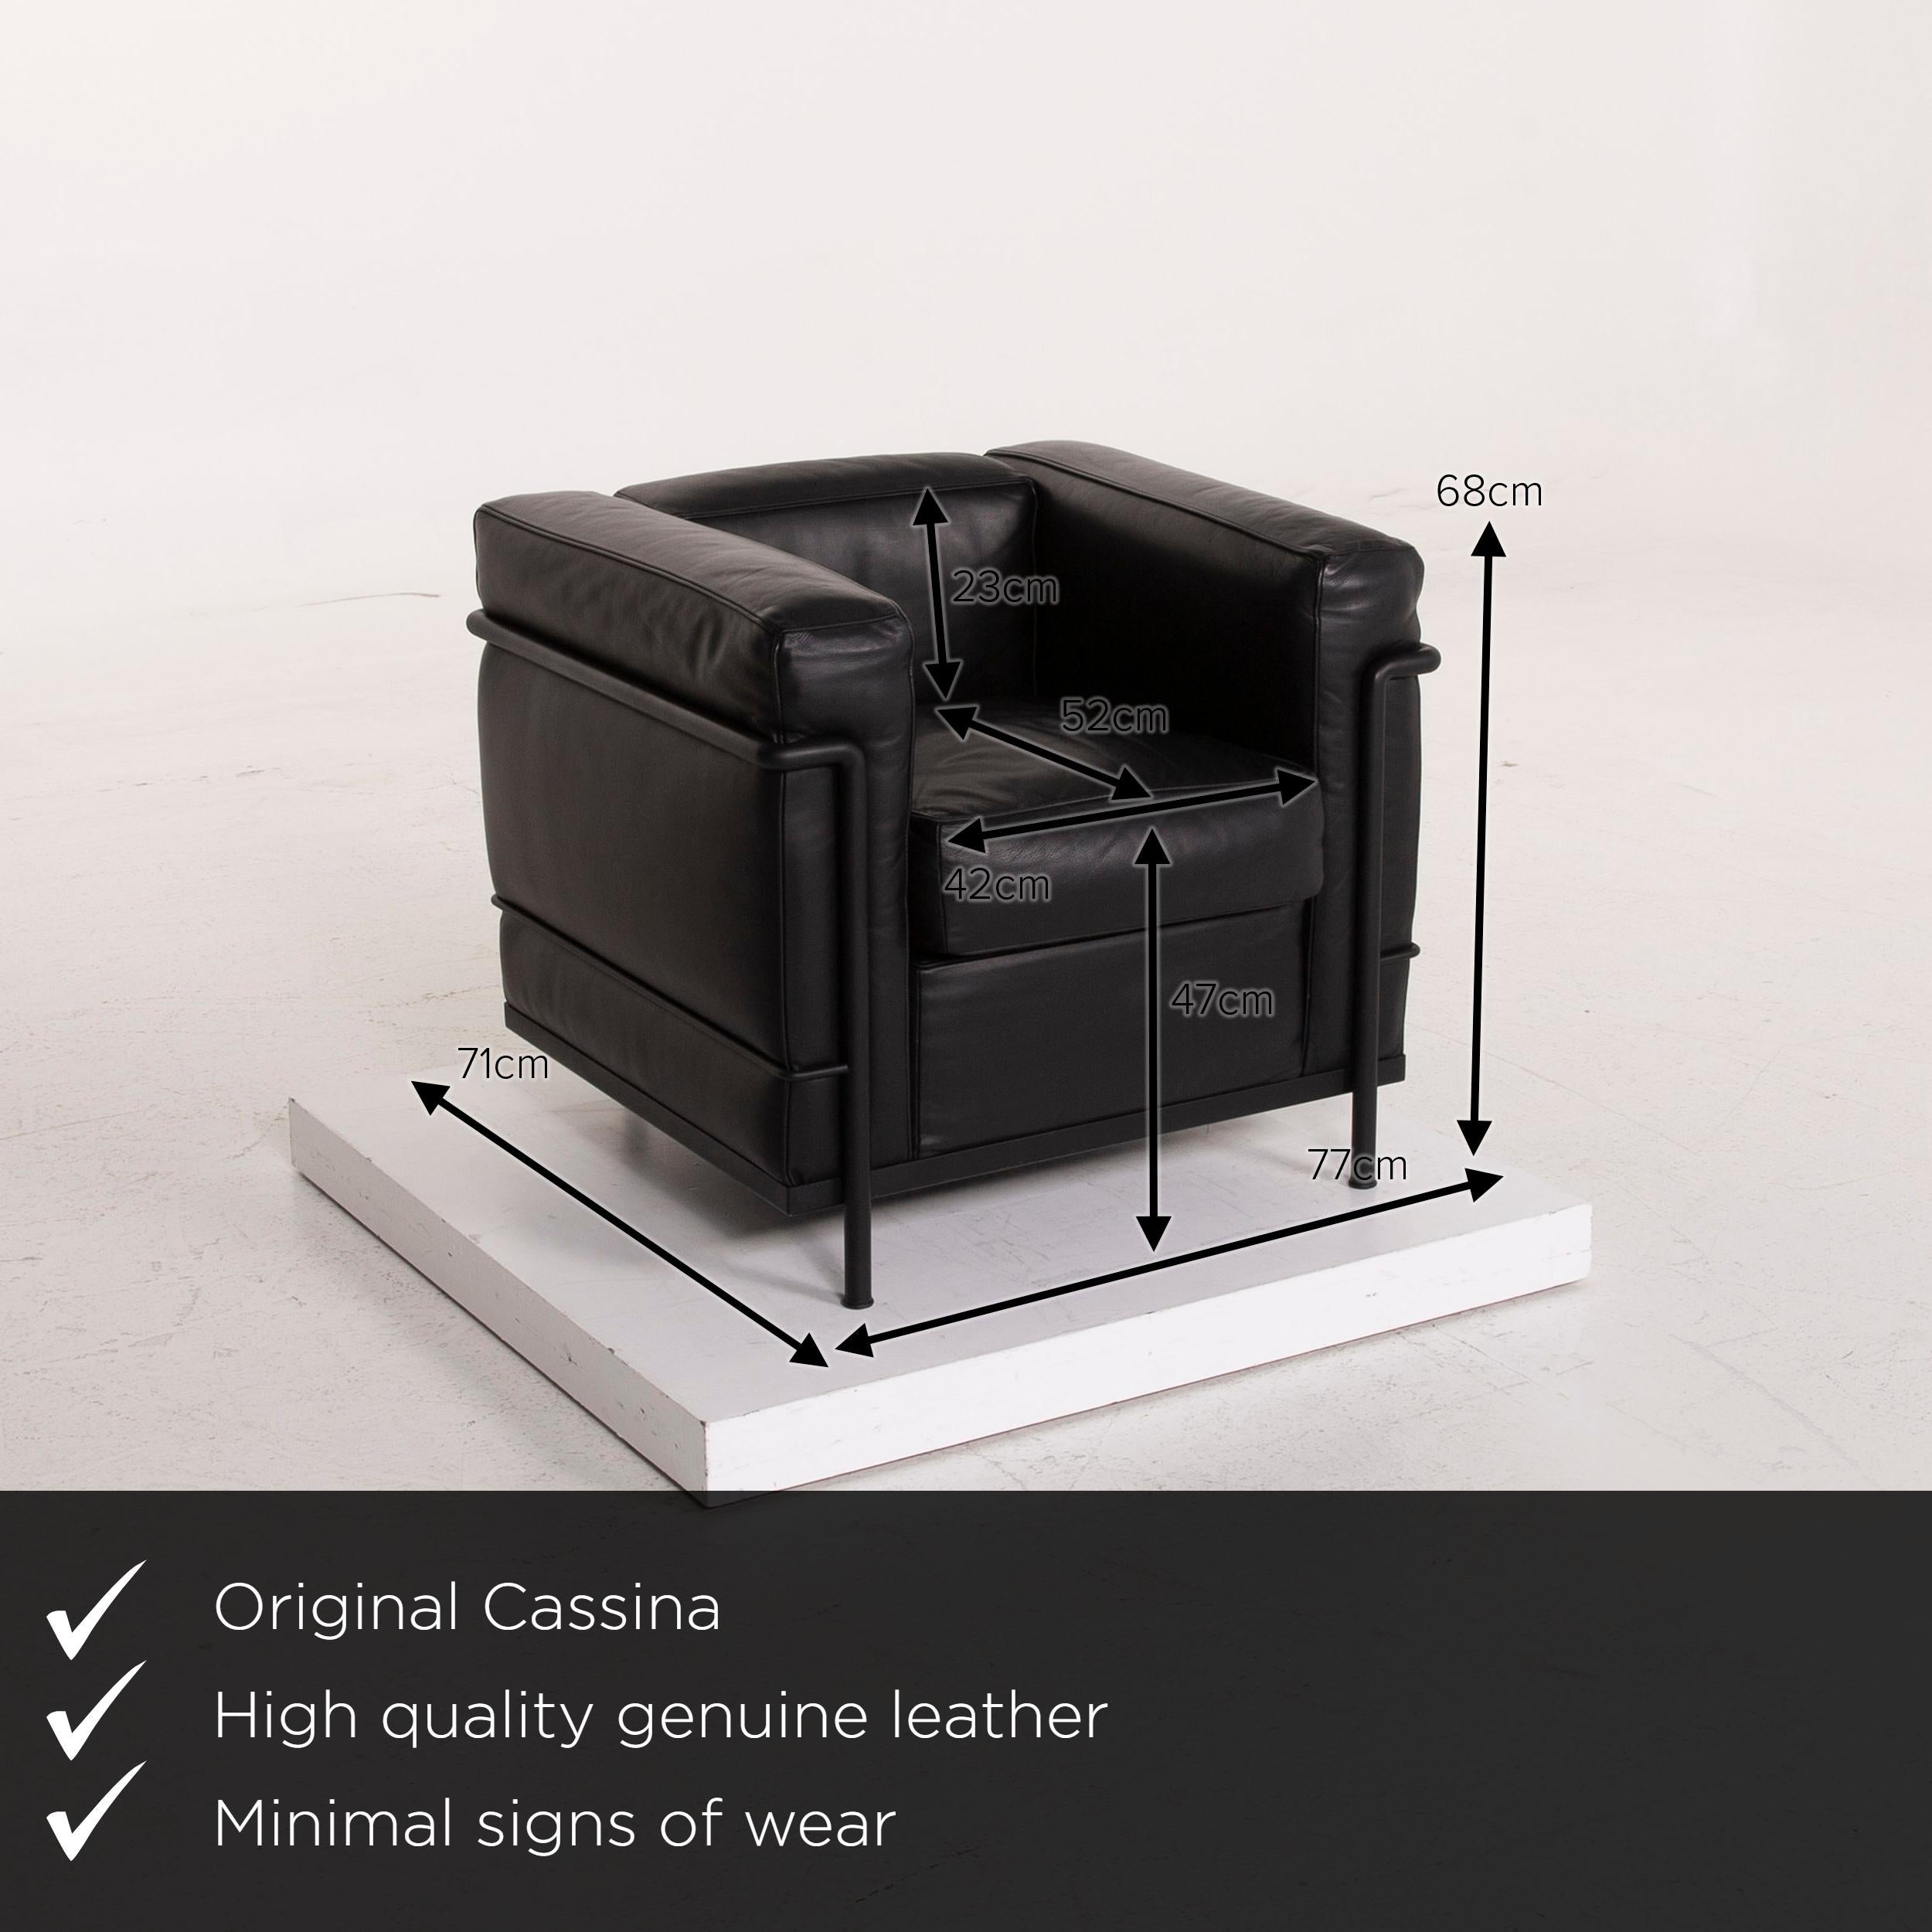 We present to you a Cassina Le Corbusier LC 2 leather armchair black.


 Product measurements in centimeters:
 

Depth 71
Width 77
Height 68
Seat height 47
Rest height 68
Seat depth 52
Seat width 42
Back height 23.
 